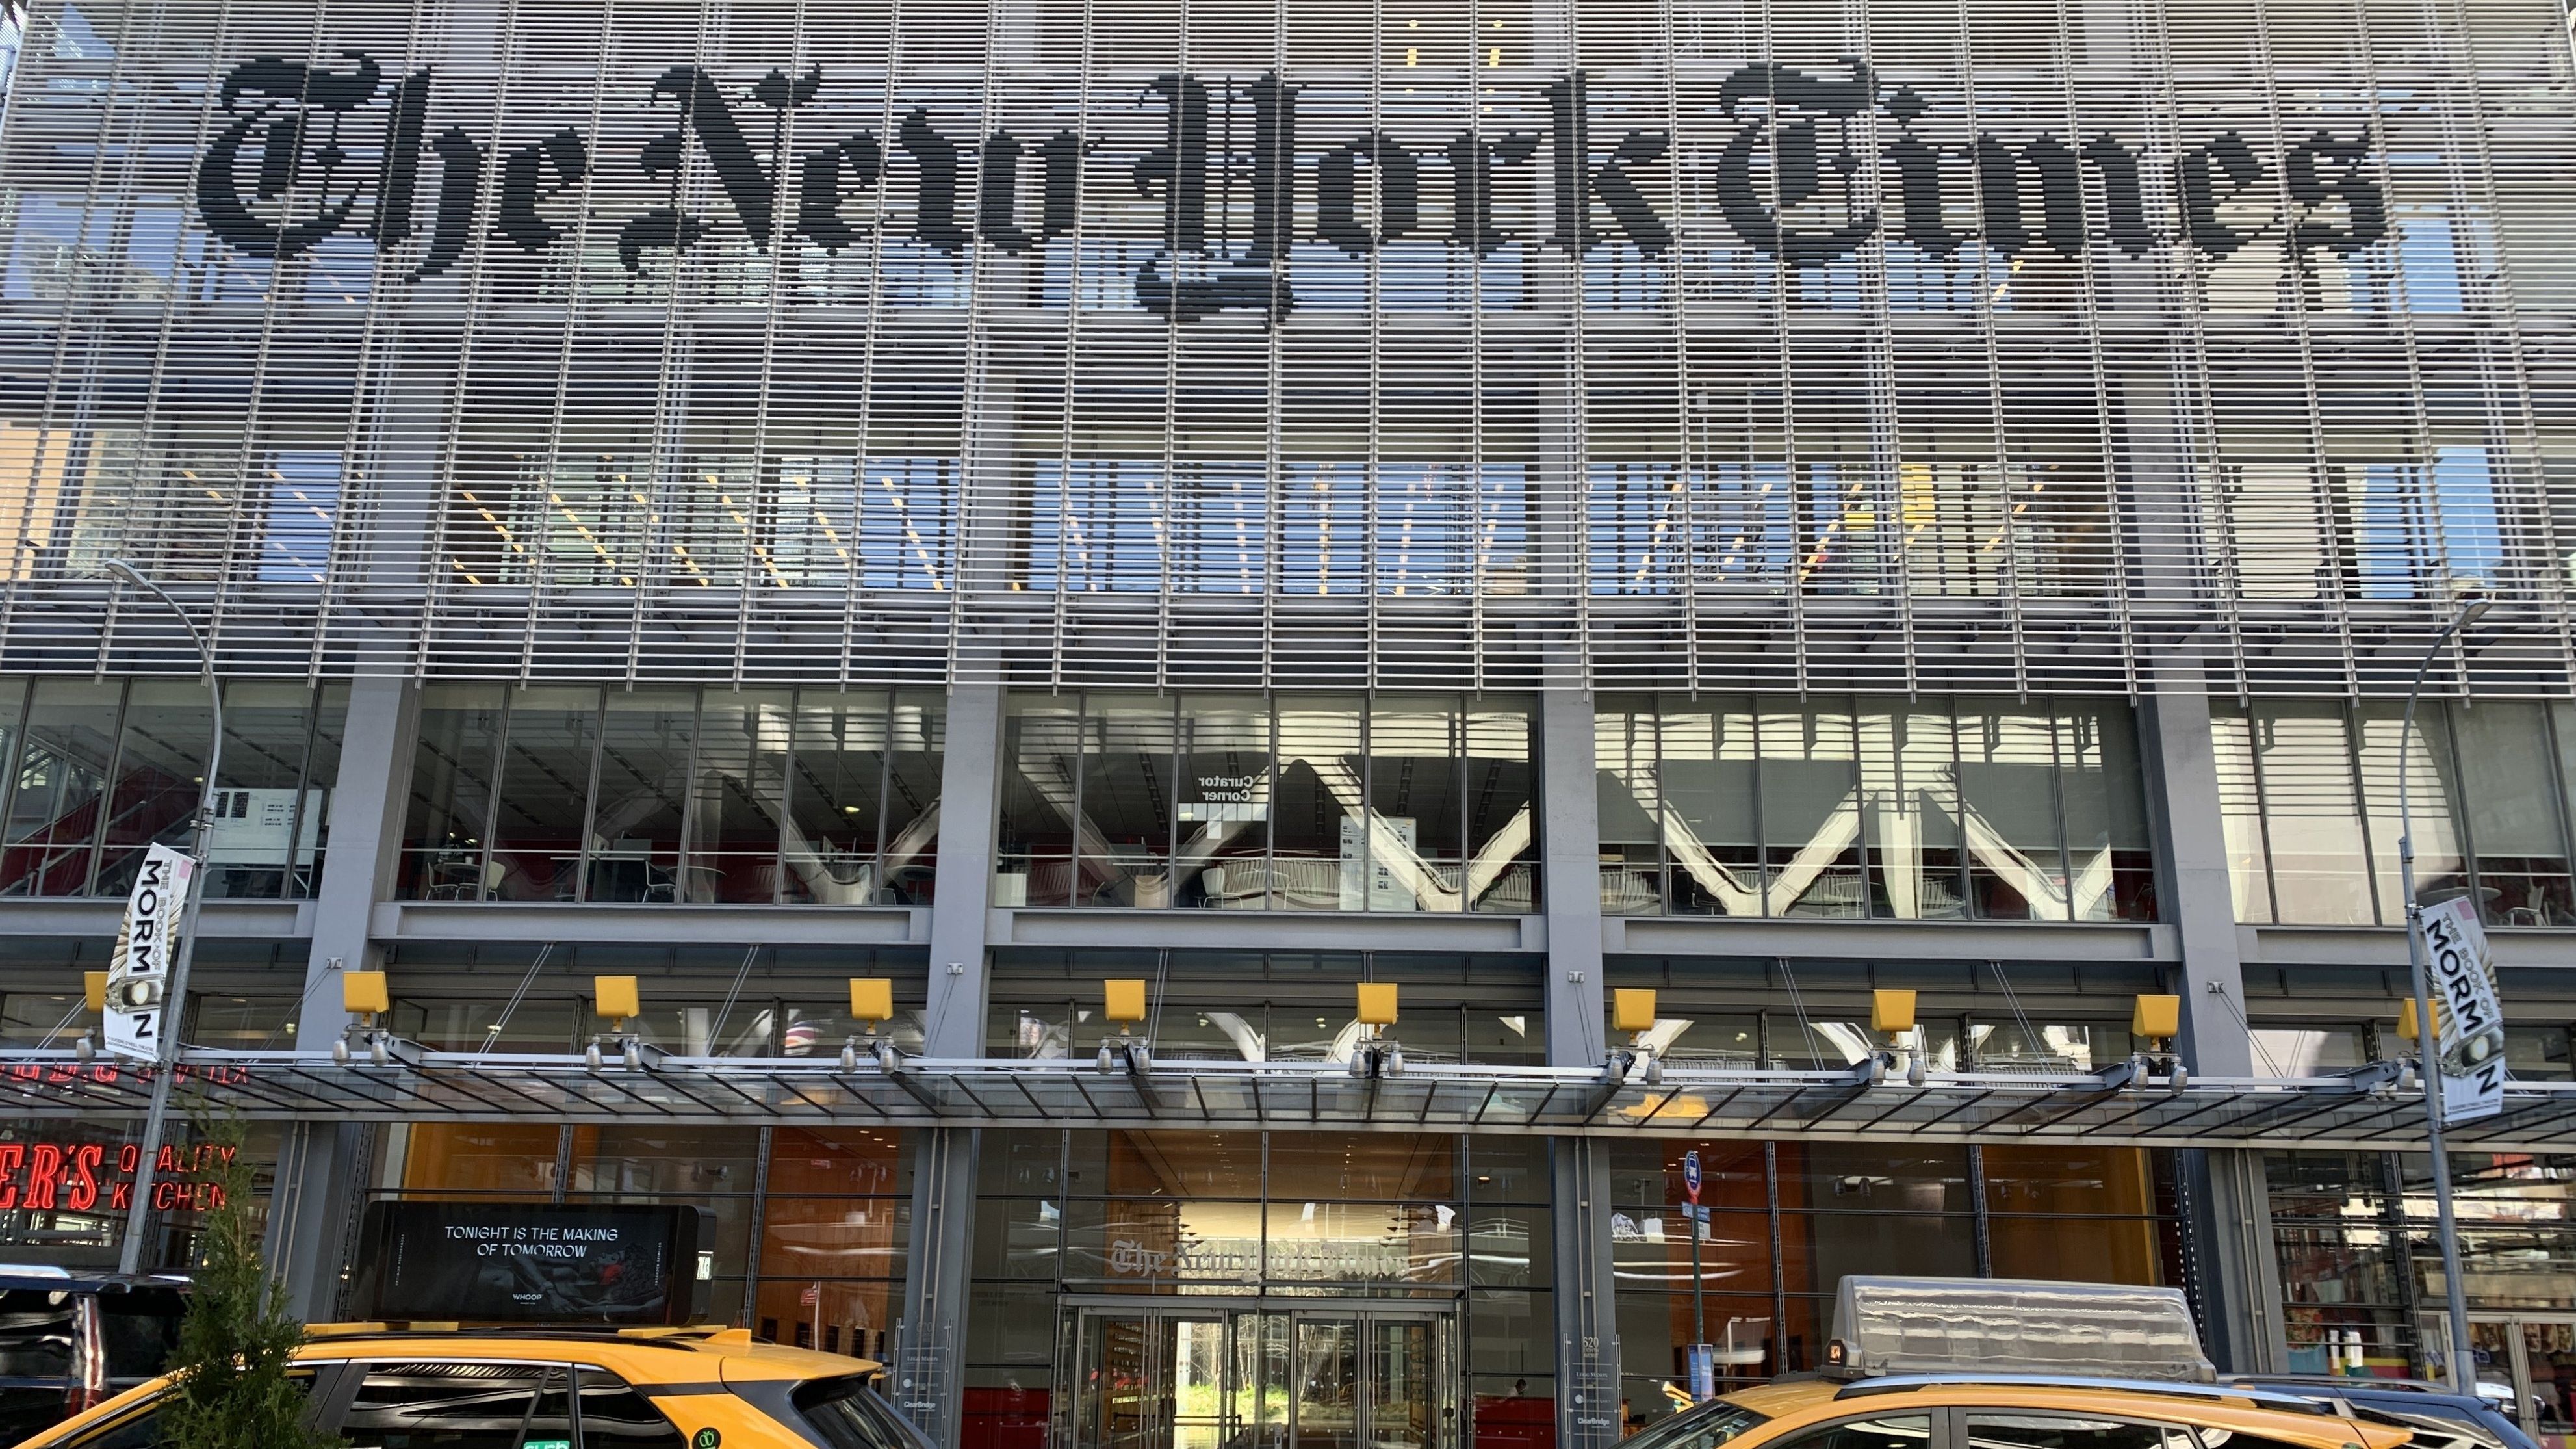 First strike in 40 years by employees of ‘The New York Times’